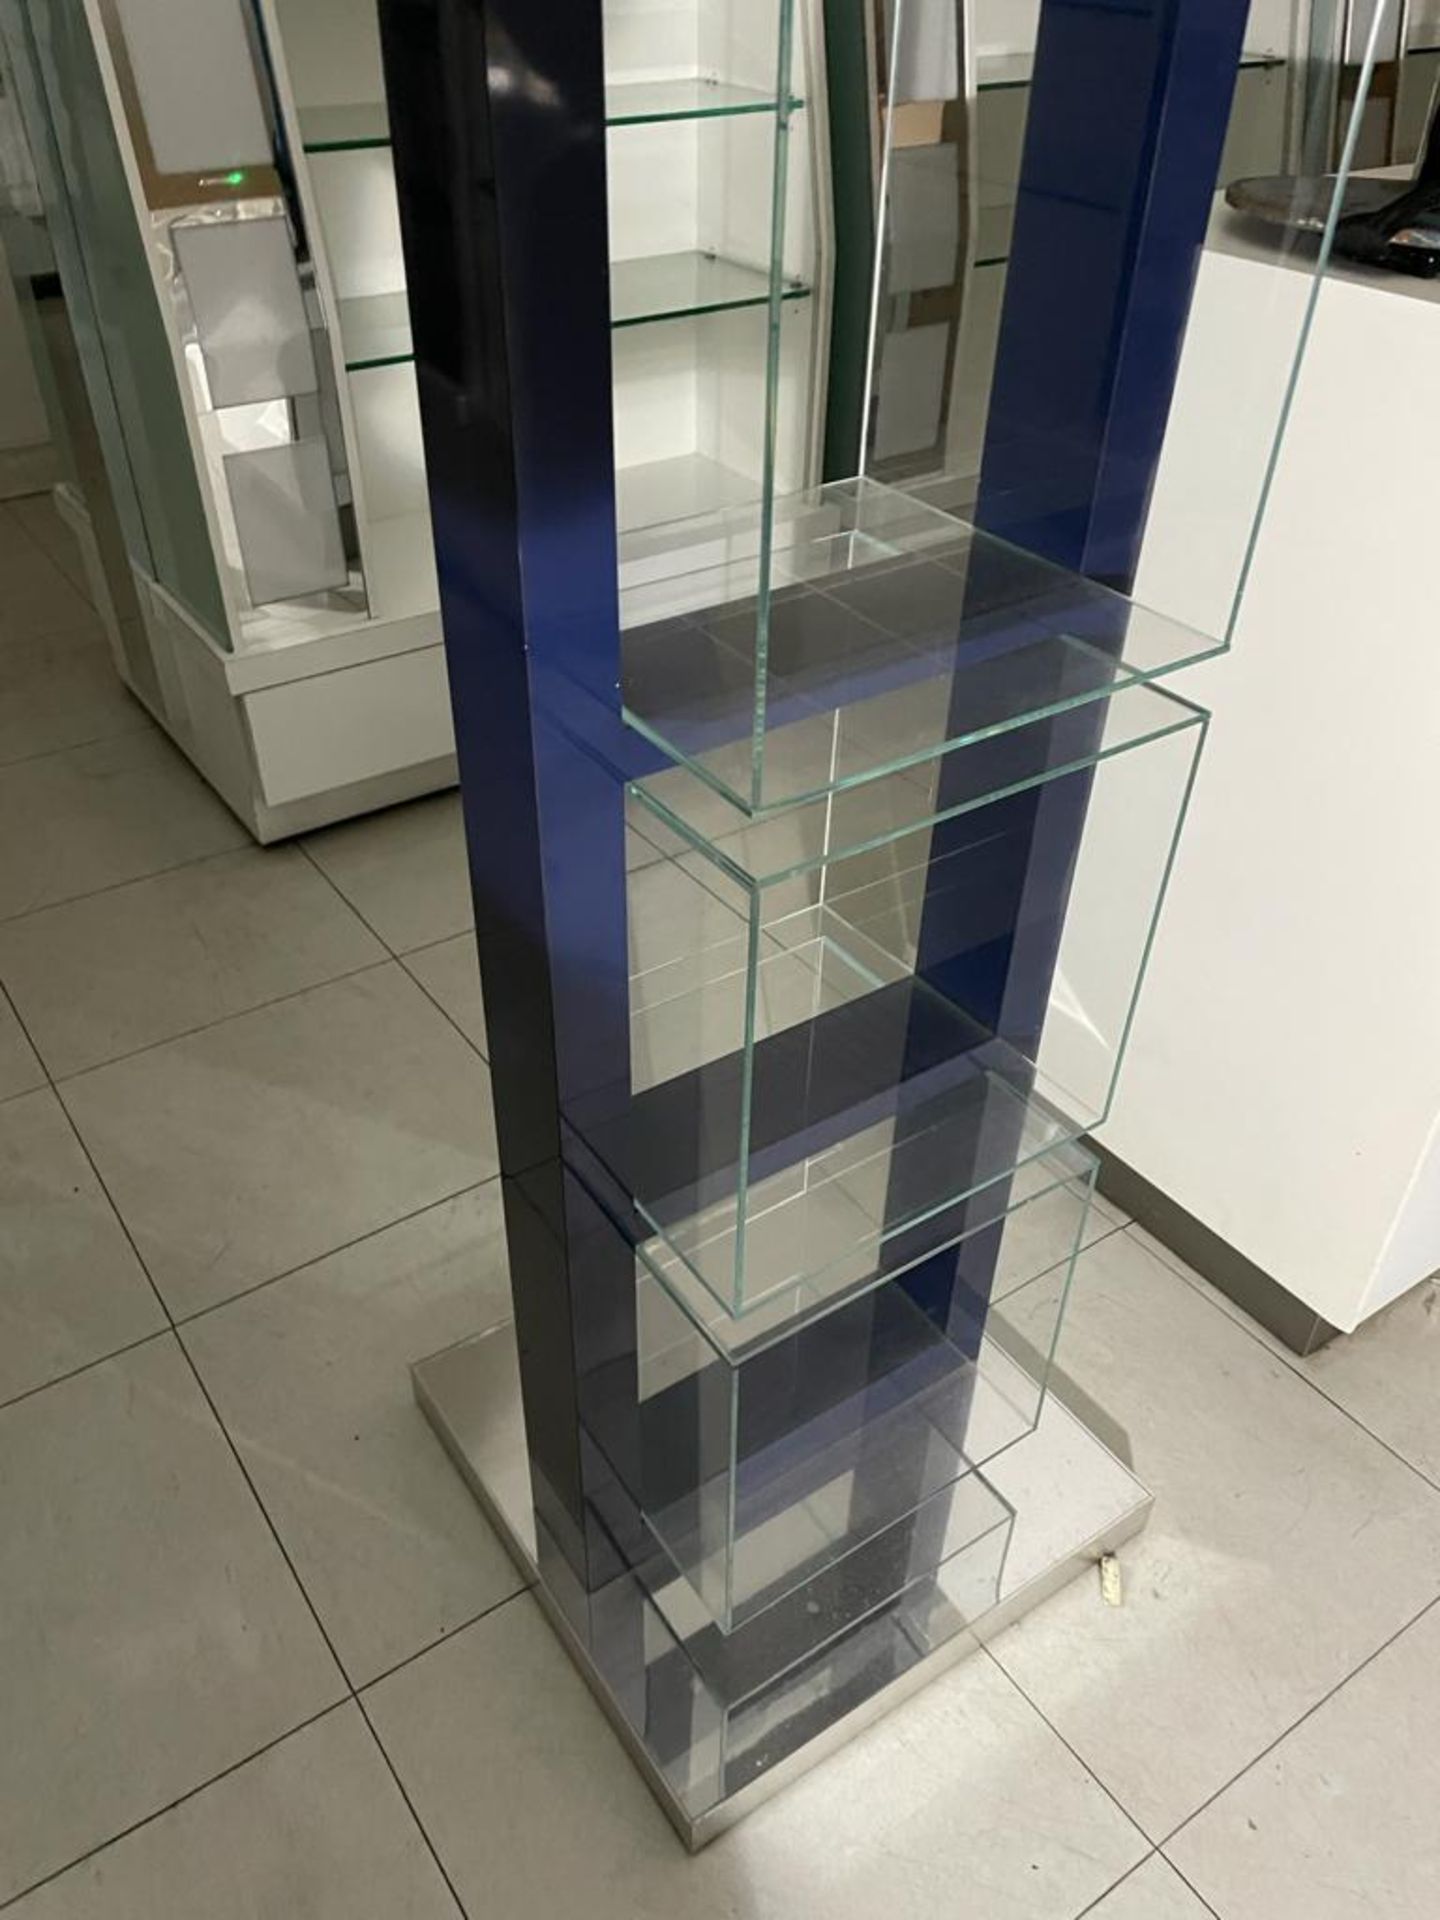 1 x Estee Lauder Free Standing Retail Display Unit With Glass Cube Display Shelves - Size H175 x W49 - Image 2 of 8